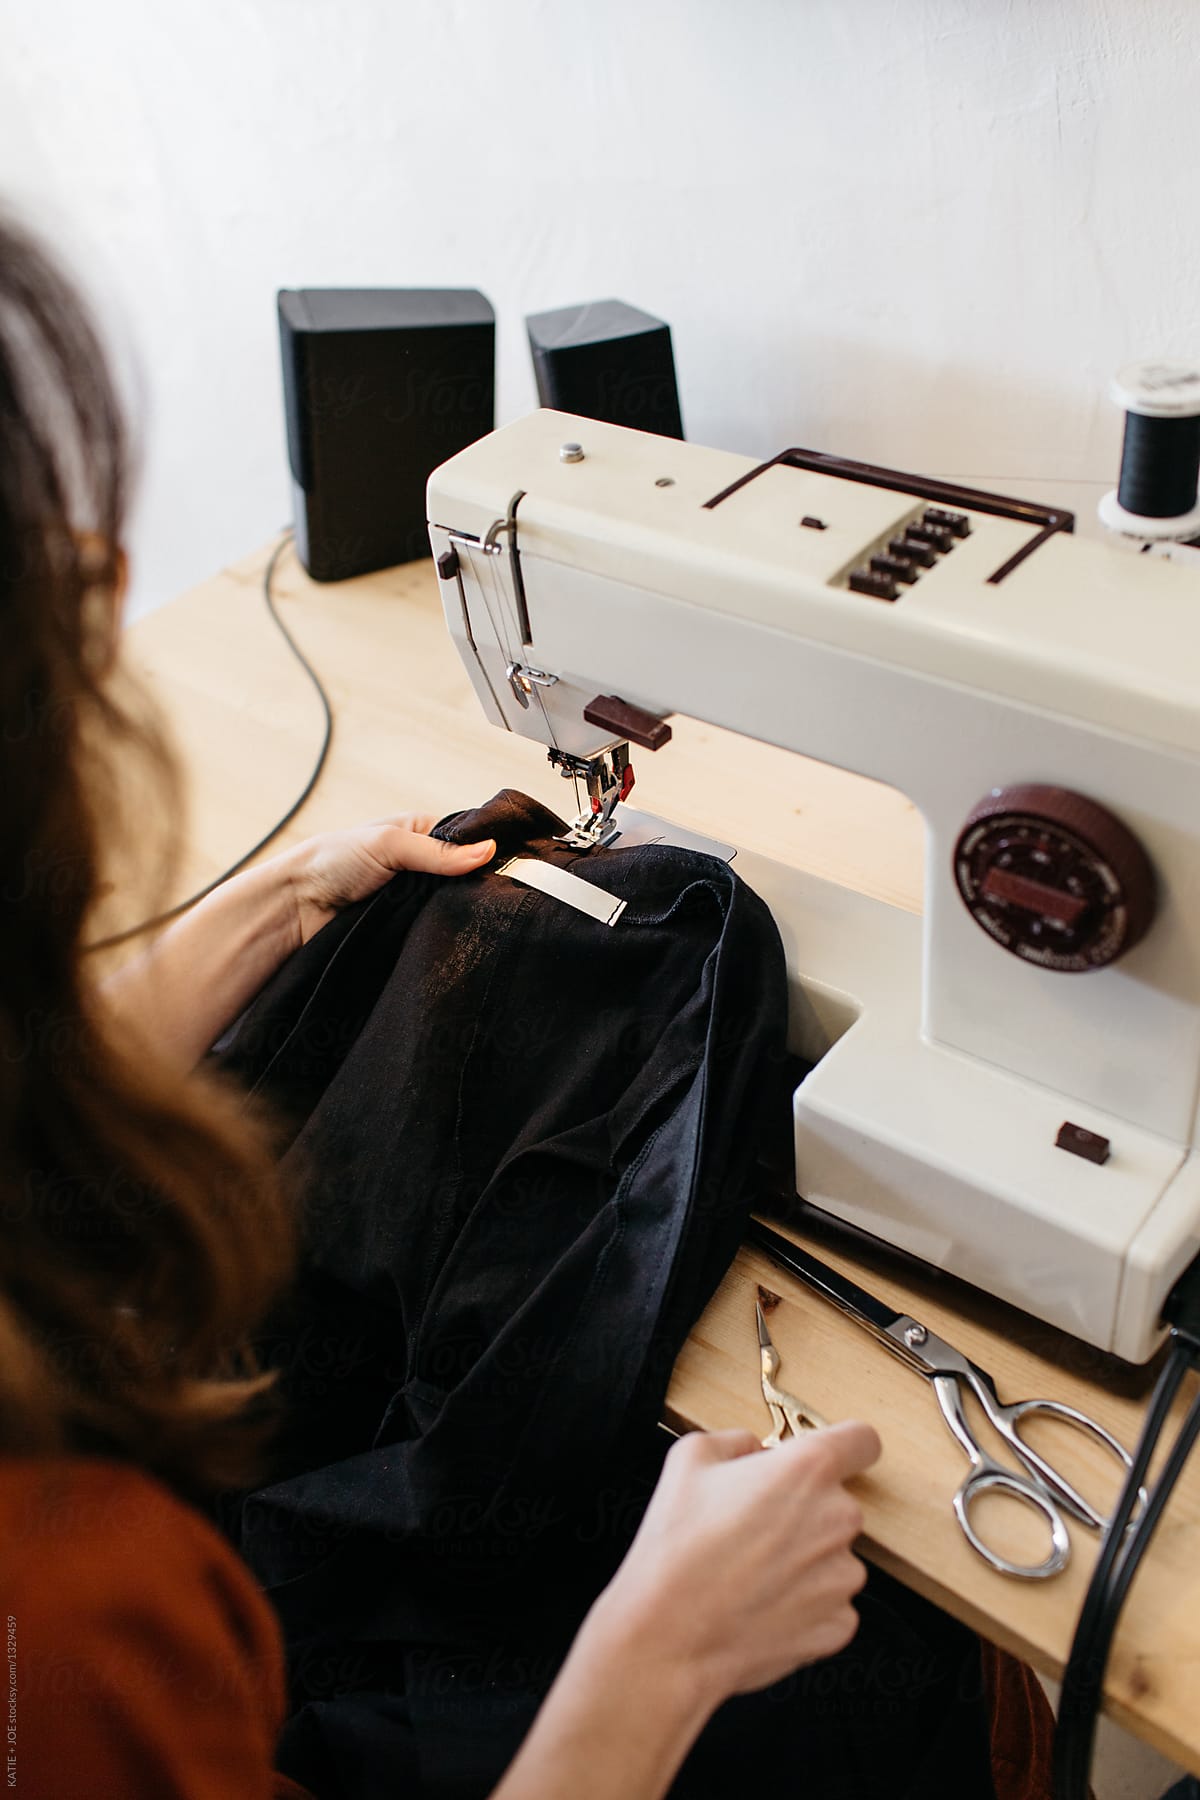 Woman sewing a label on a black blouse with a sew machine